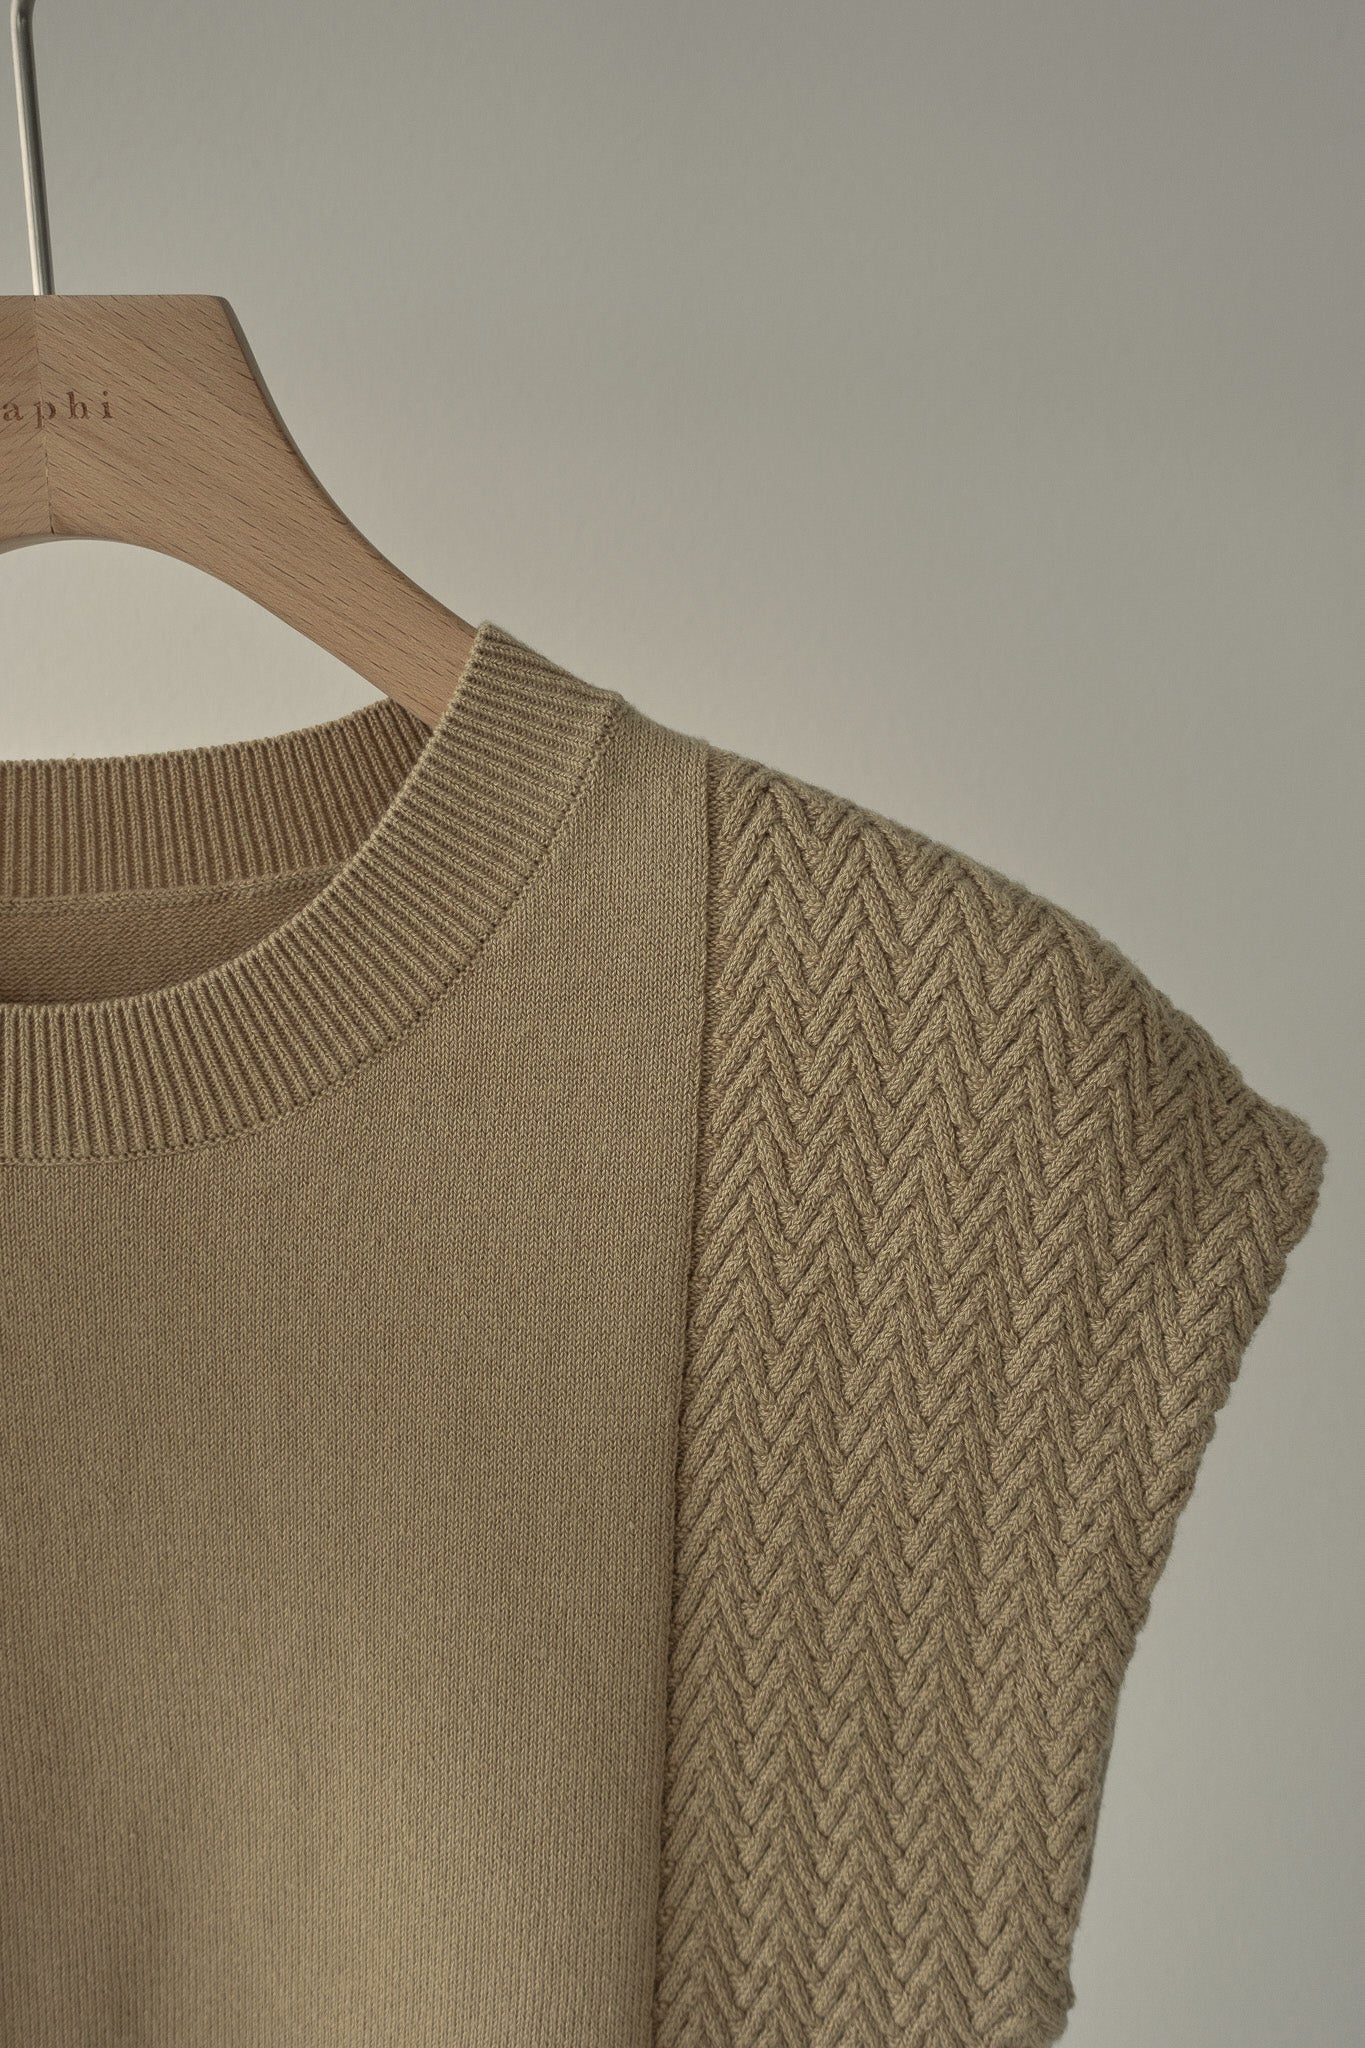 23SS】french sleeve knit – Eaphi